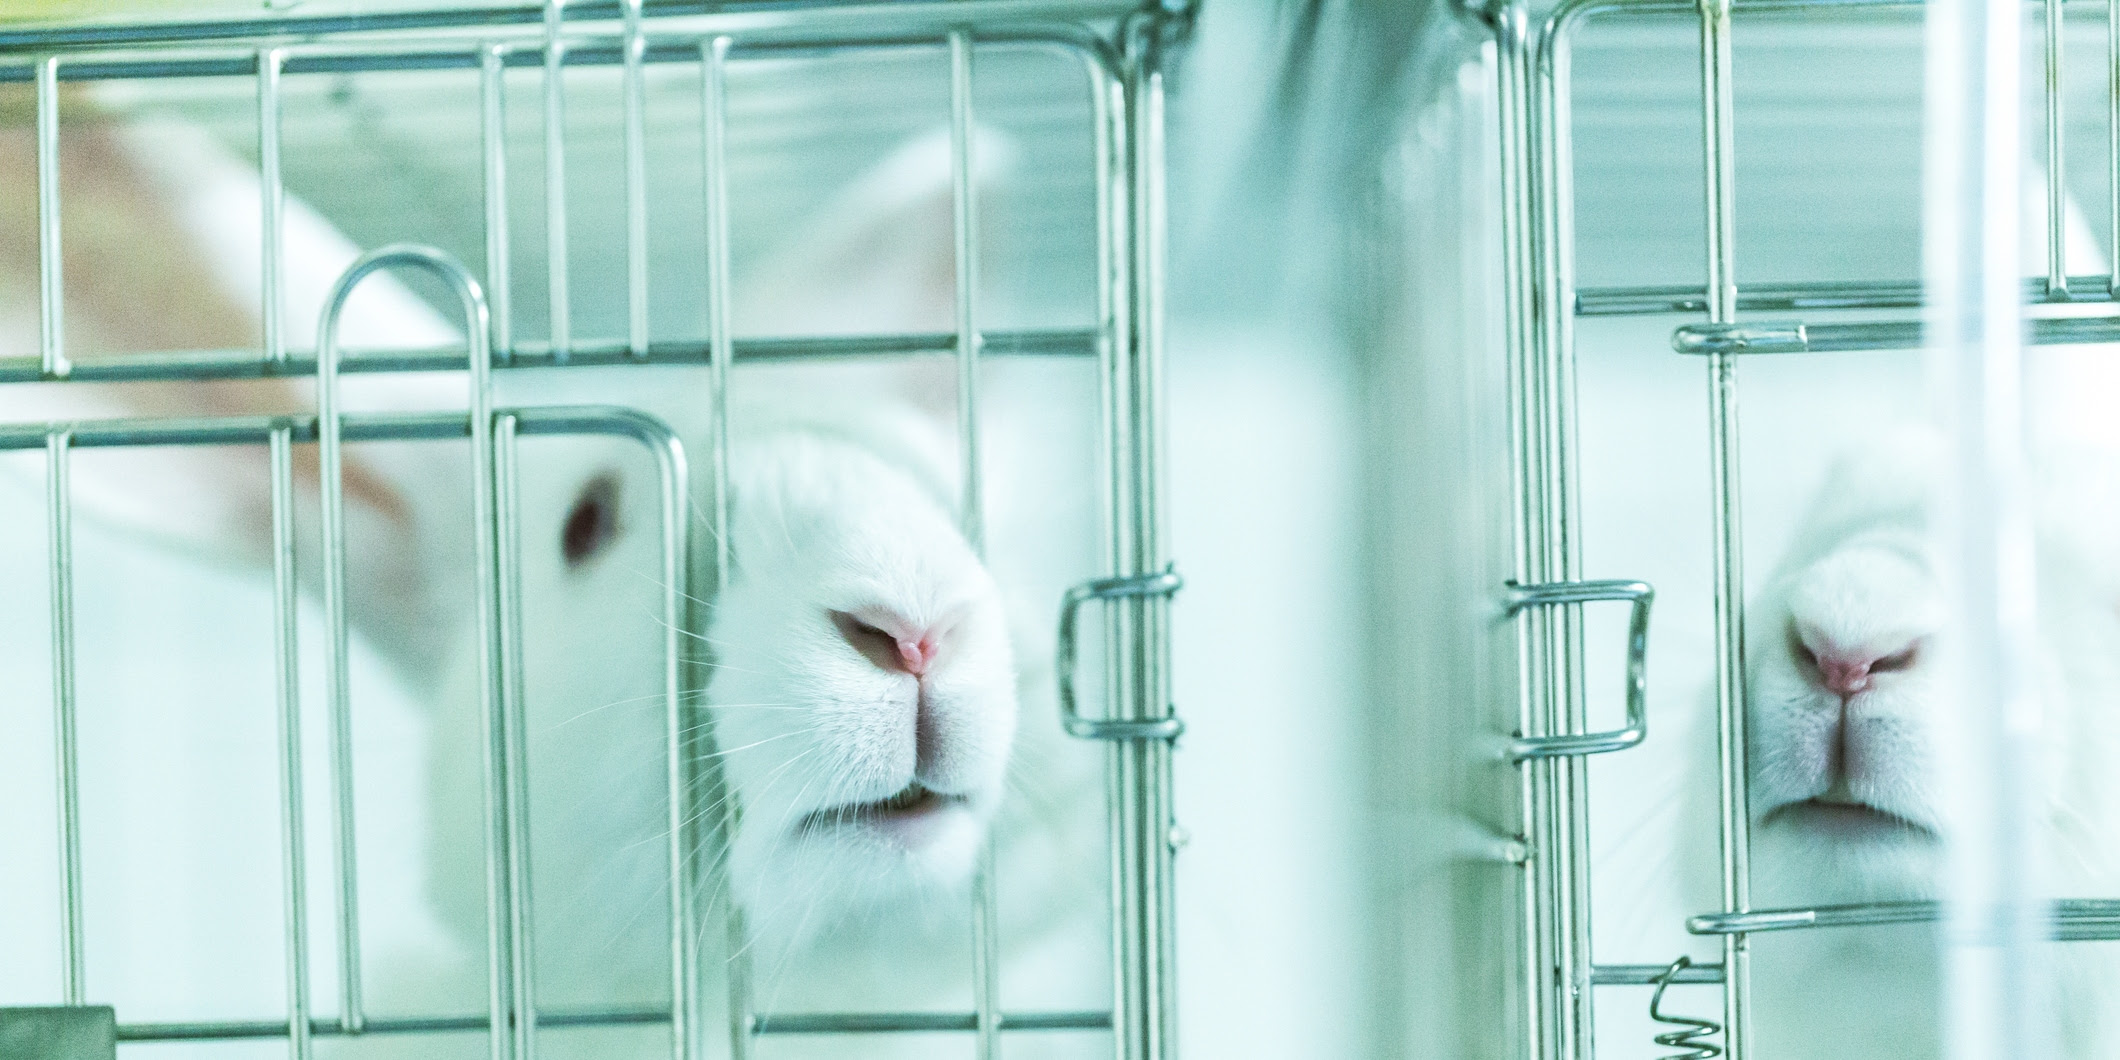 Two rabbits pushing their noses through the bars of their cages.